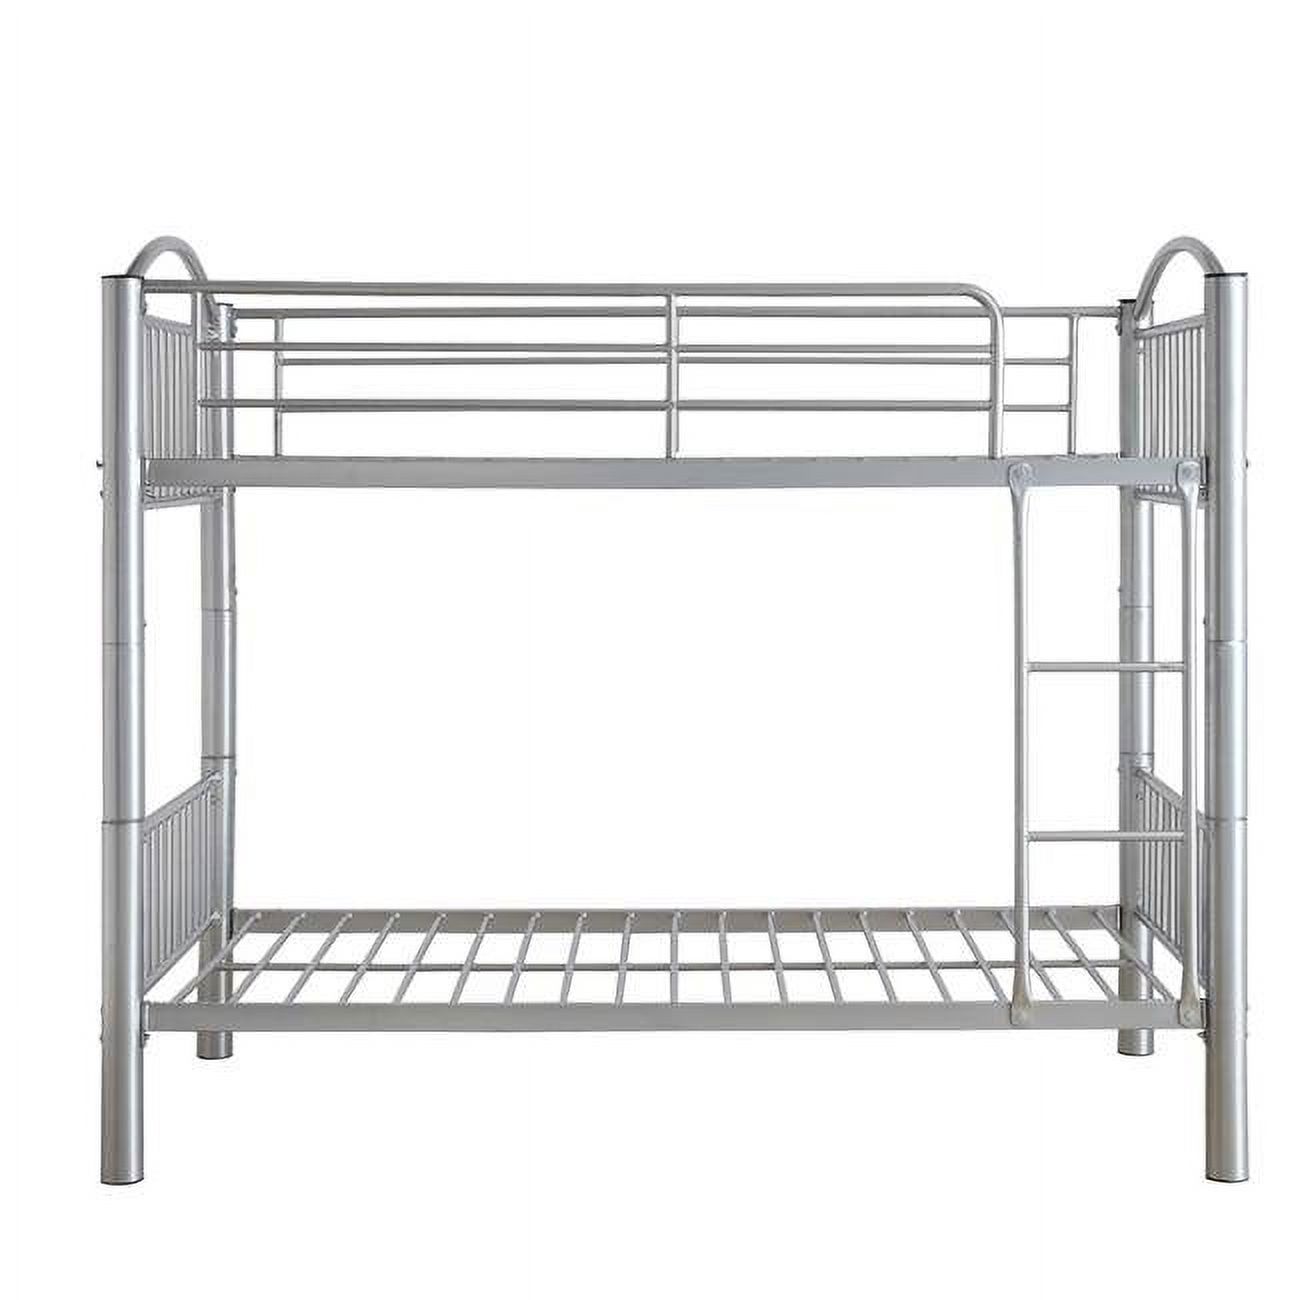 Home Roots Furniture 286164 67 x 78 x 44 in. Metal Twin Over Bunkbed - Silver - image 1 of 1